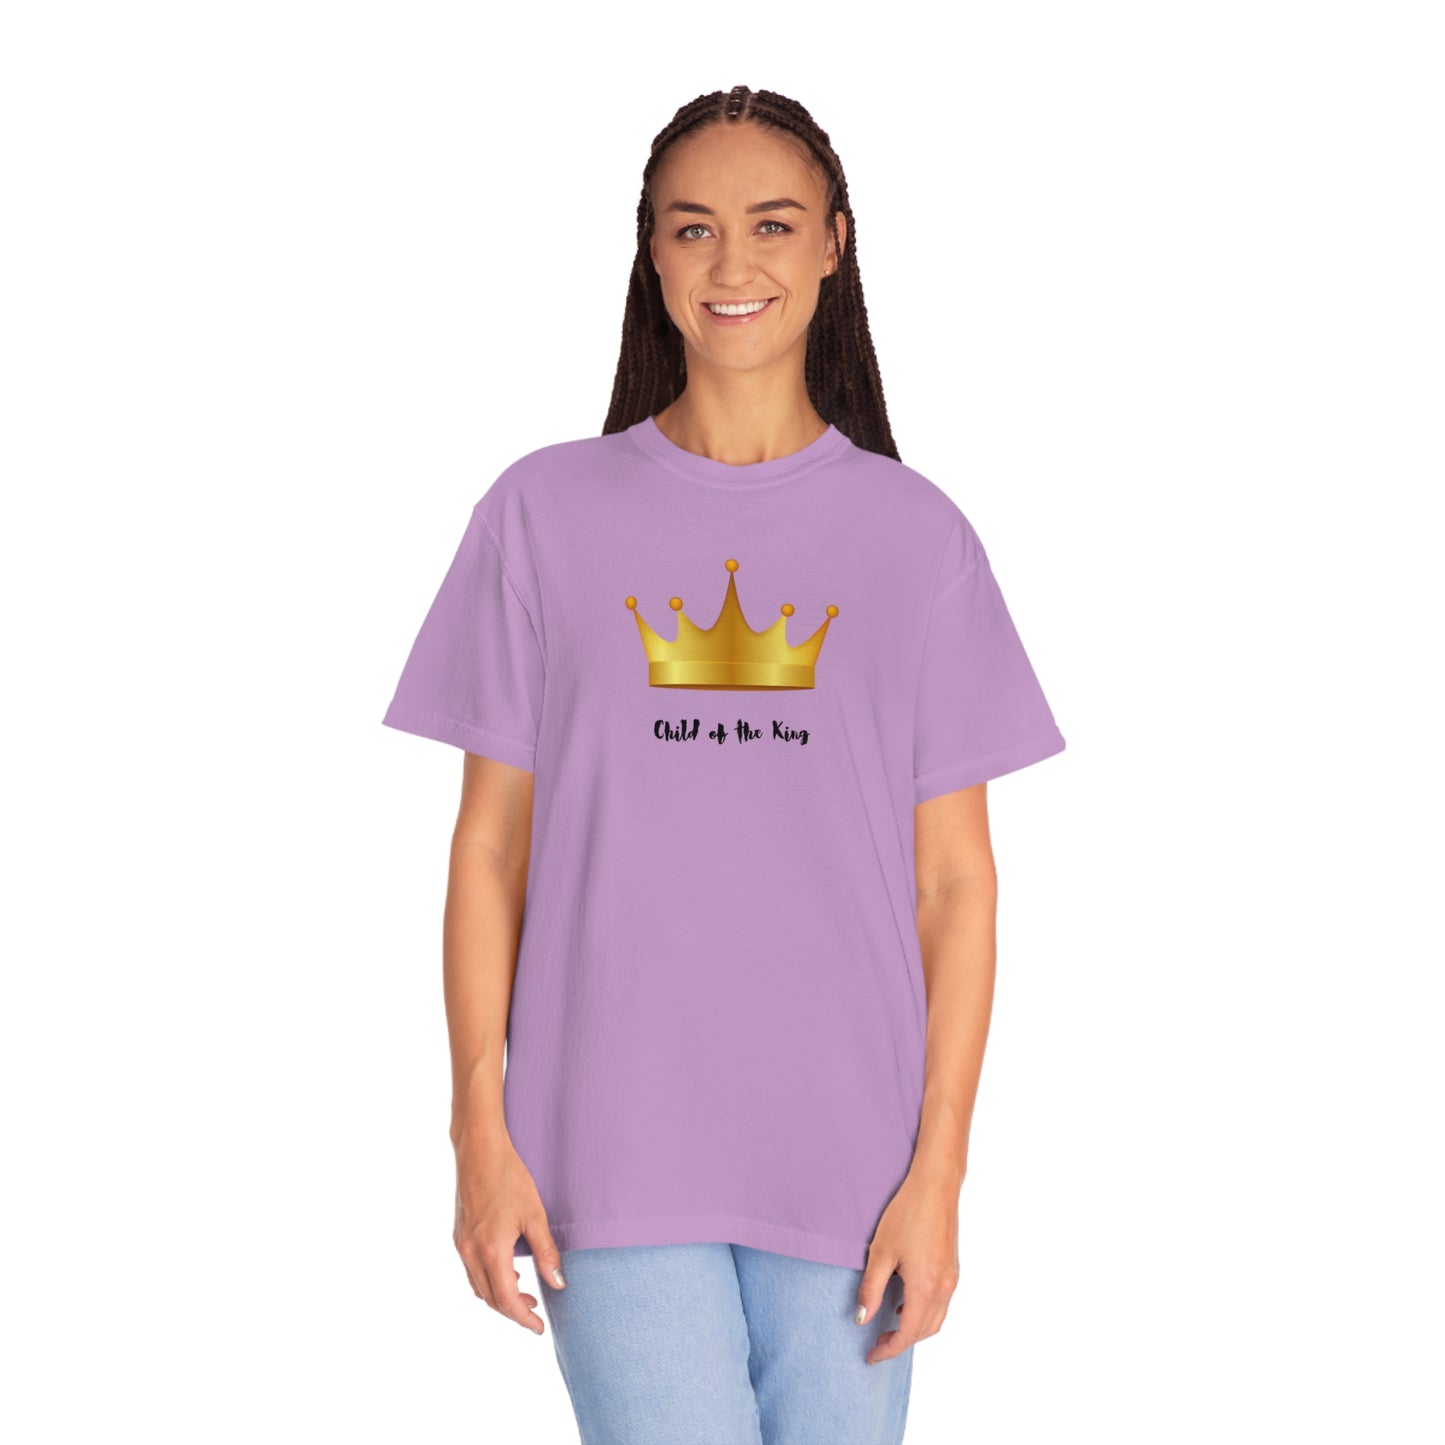 Child of the King Crown T-shirt